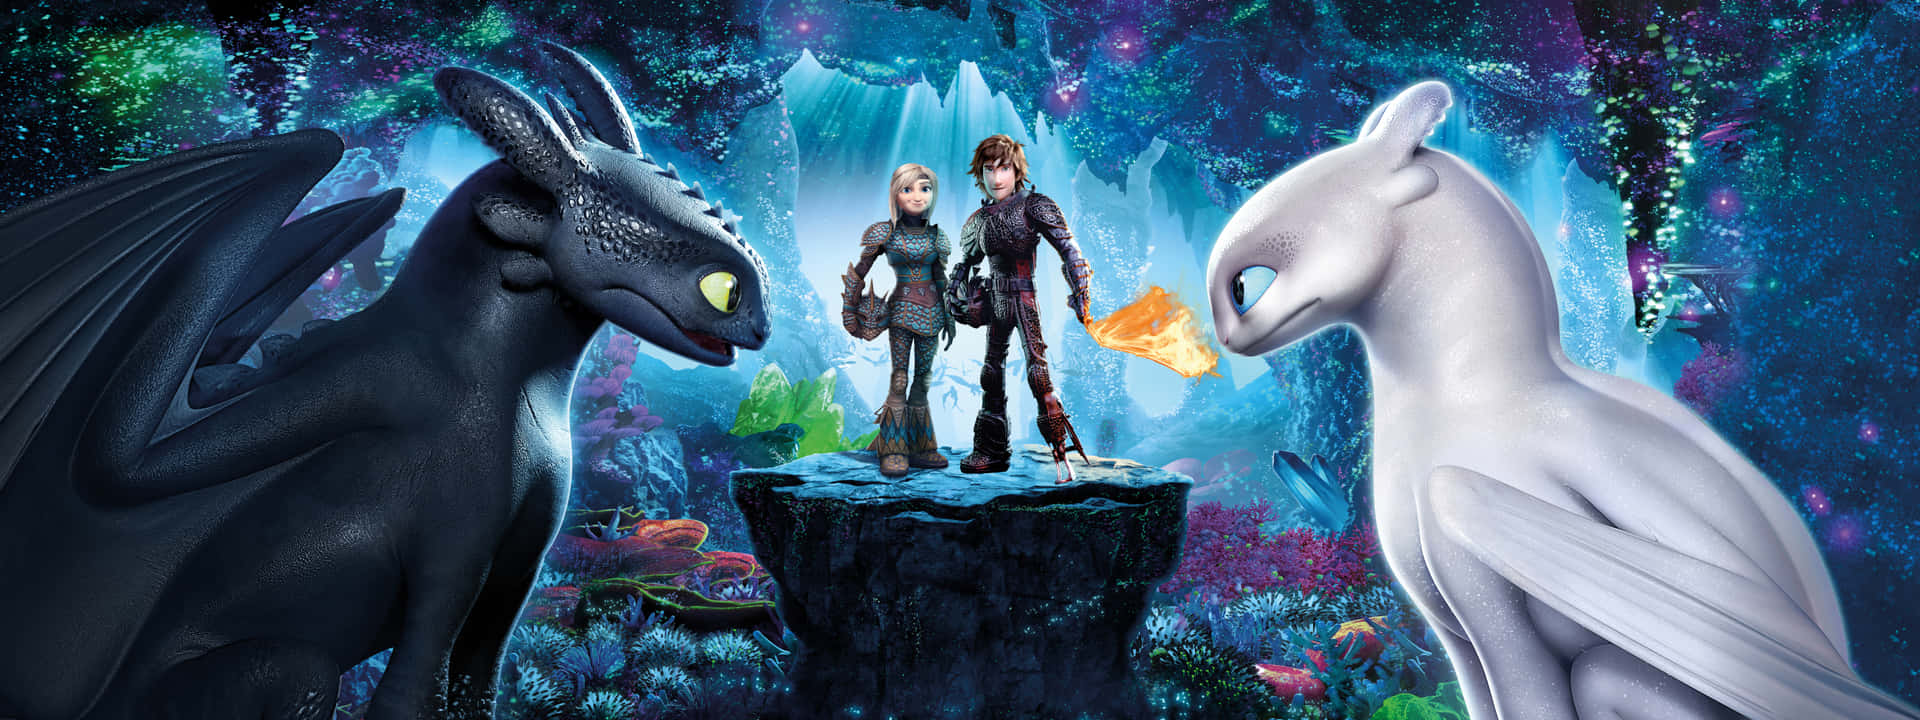 "Explore the Magical World of How To Train Your Dragon in 4K" Wallpaper